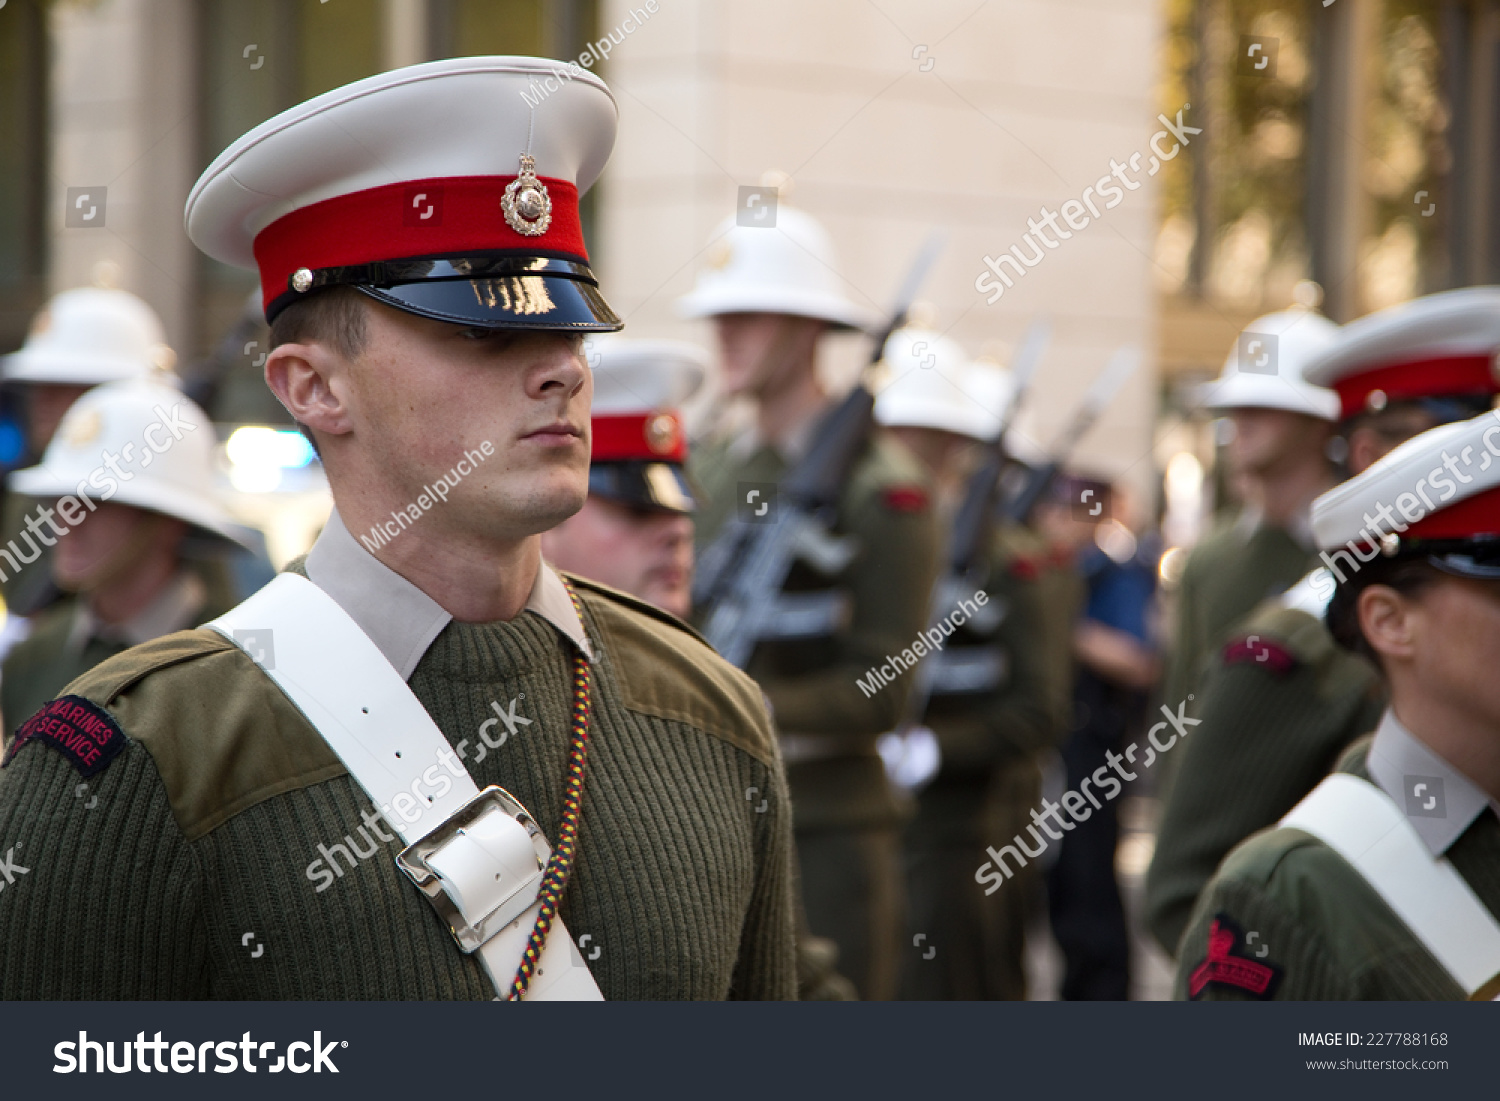 London - October 28th: The Royal Marines On Parade At The Guildhall On ...